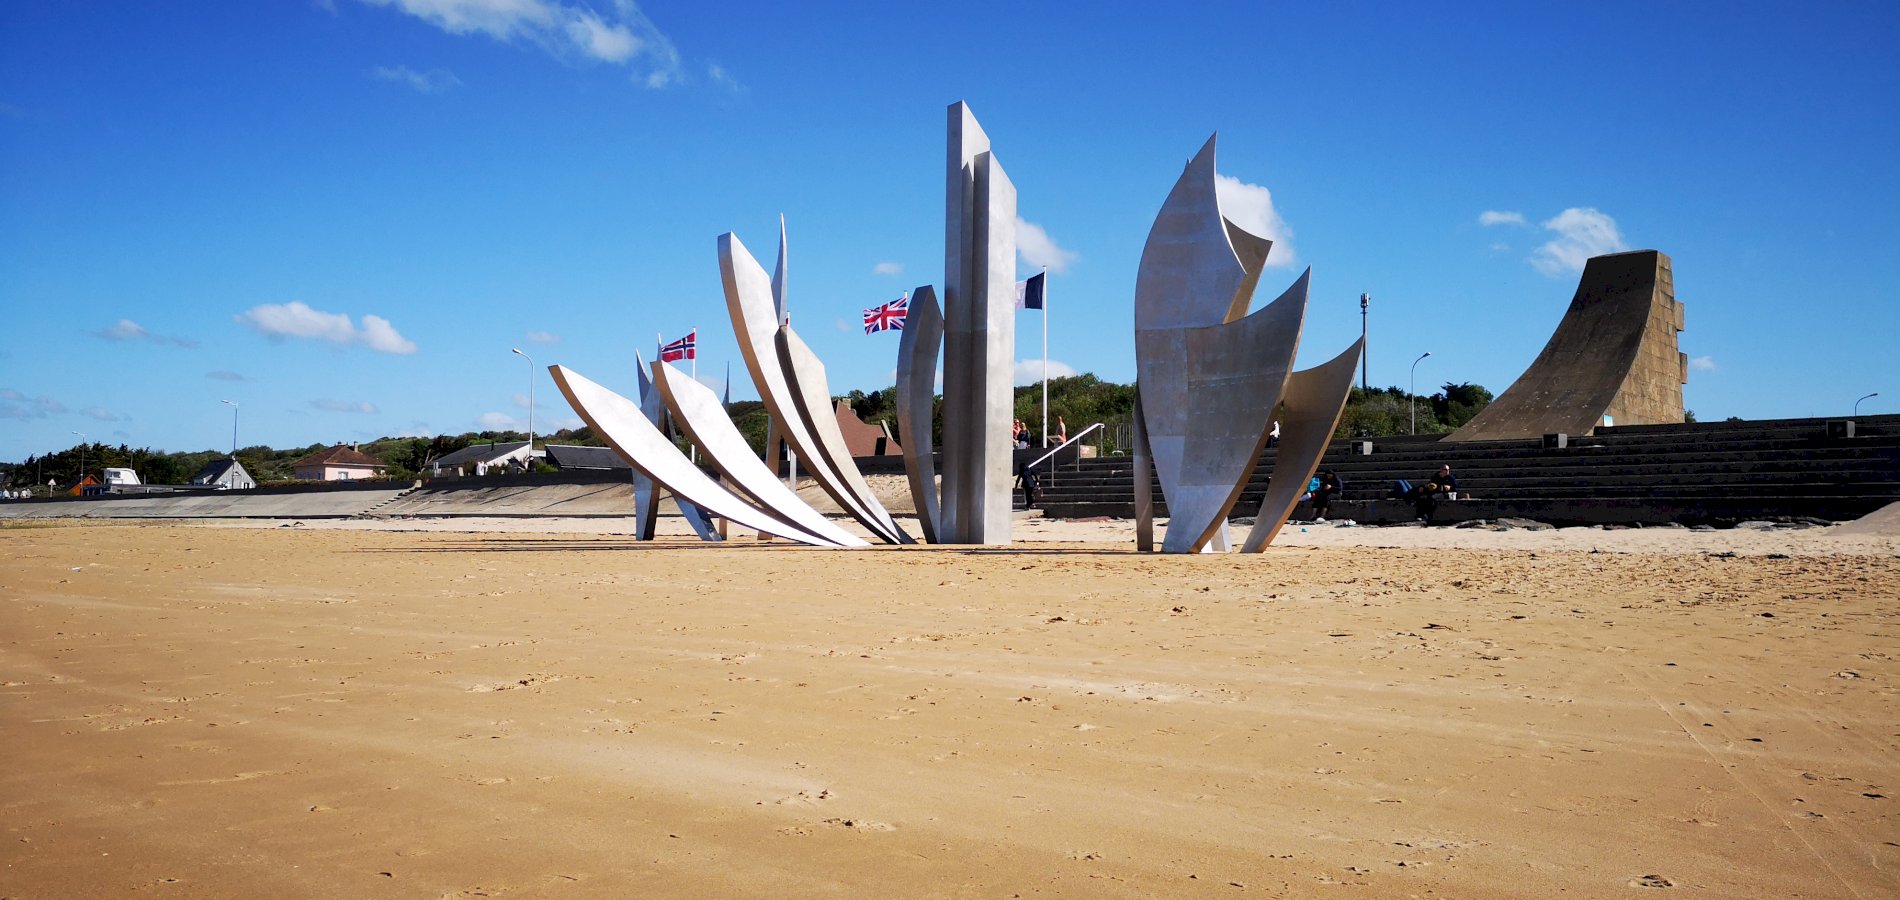 Ophorus Tours - Normandy D-DAY Landing Beaches Small Group Private Shore Excursion from Le Havre